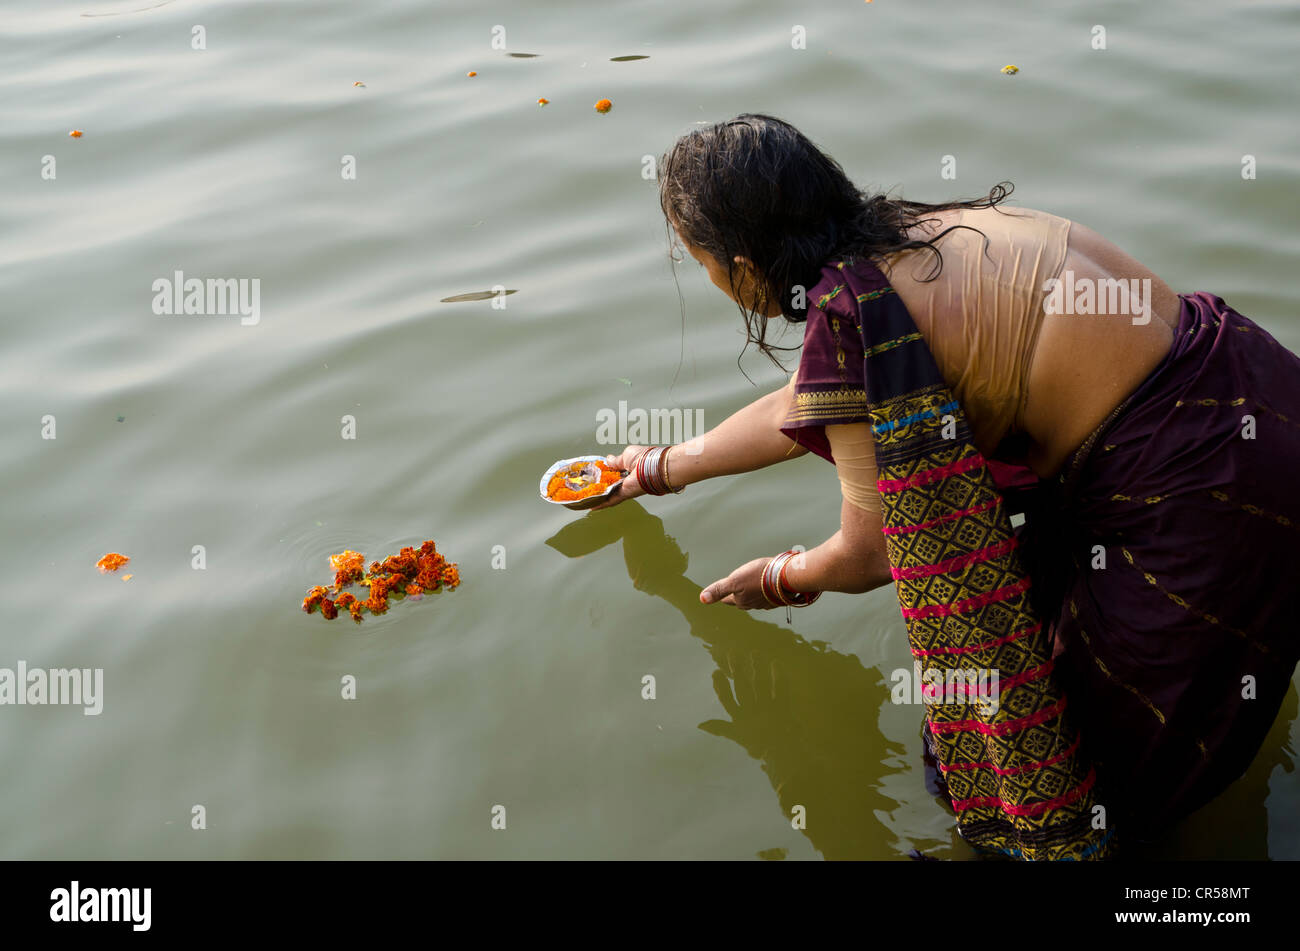 Woman giving offerings to the holy river Ganges as part of her pilgrimage to Varanasi, Uttar Pradesh, India, Asia Stock Photo